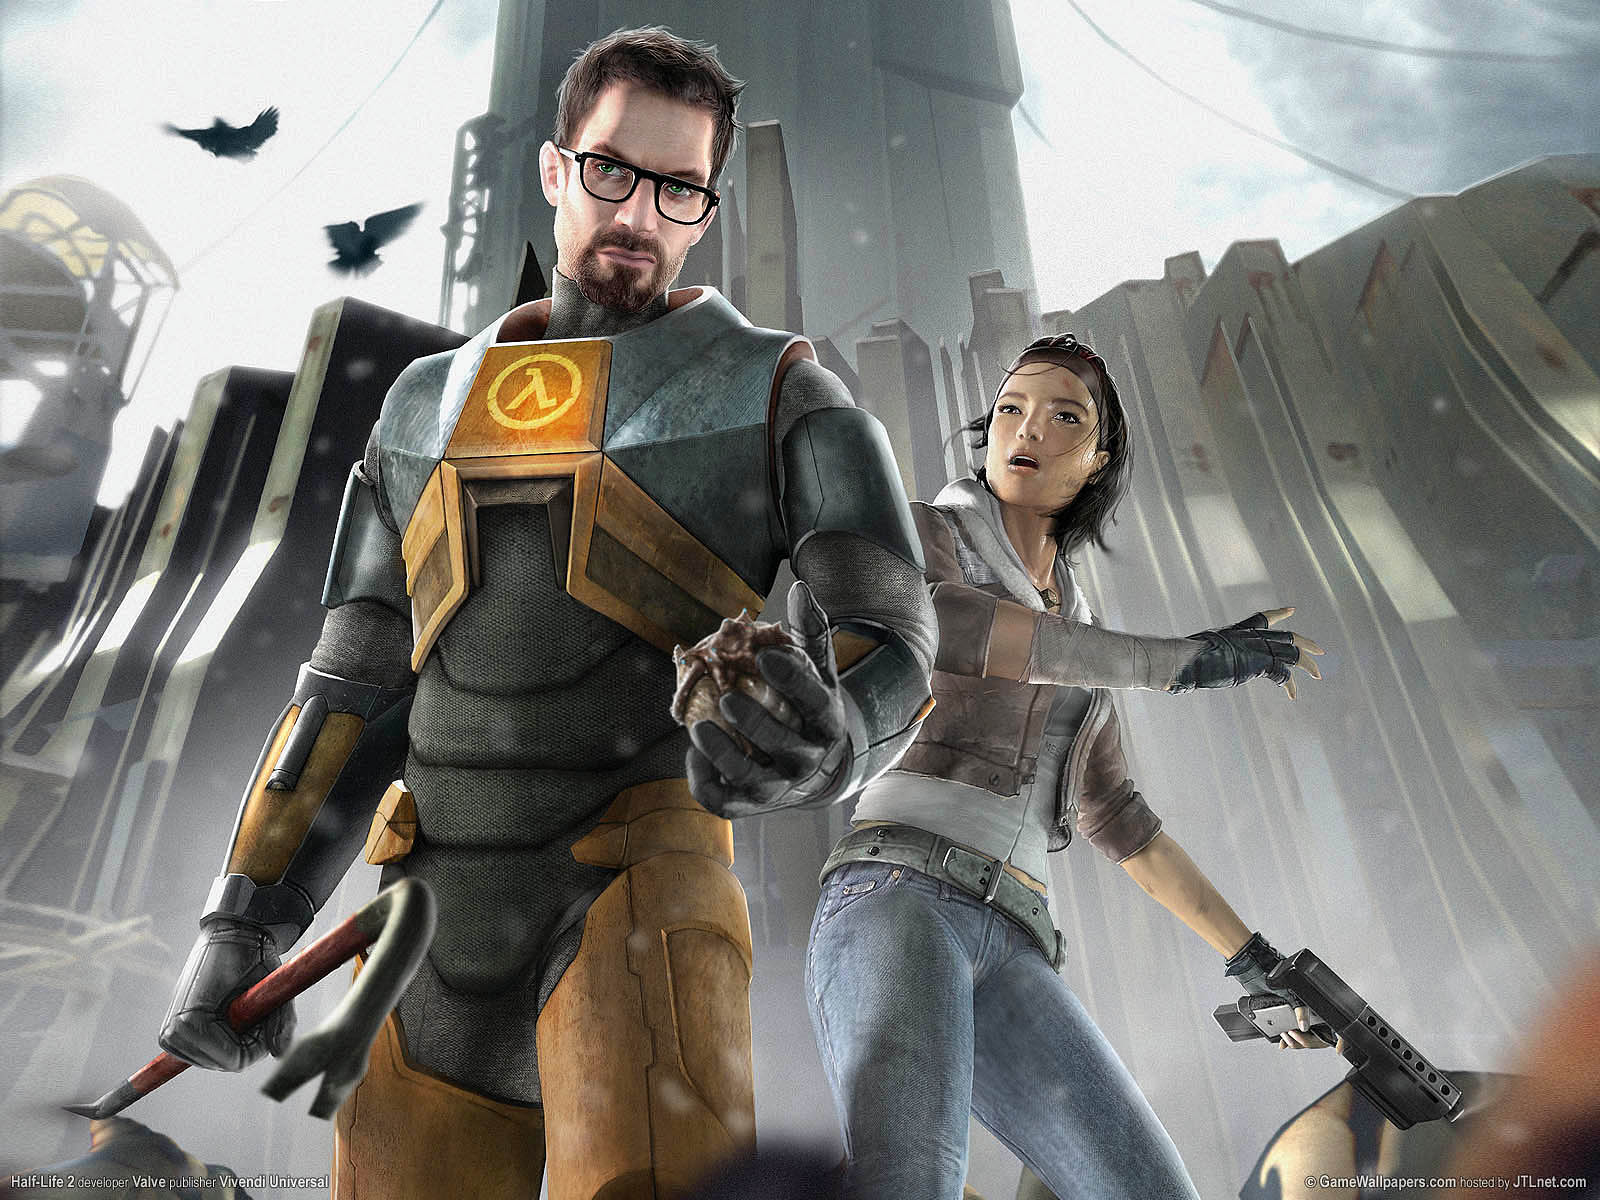 Admittedly, Valve have been very careful not to come out and say that they're developing Half-Life 3.